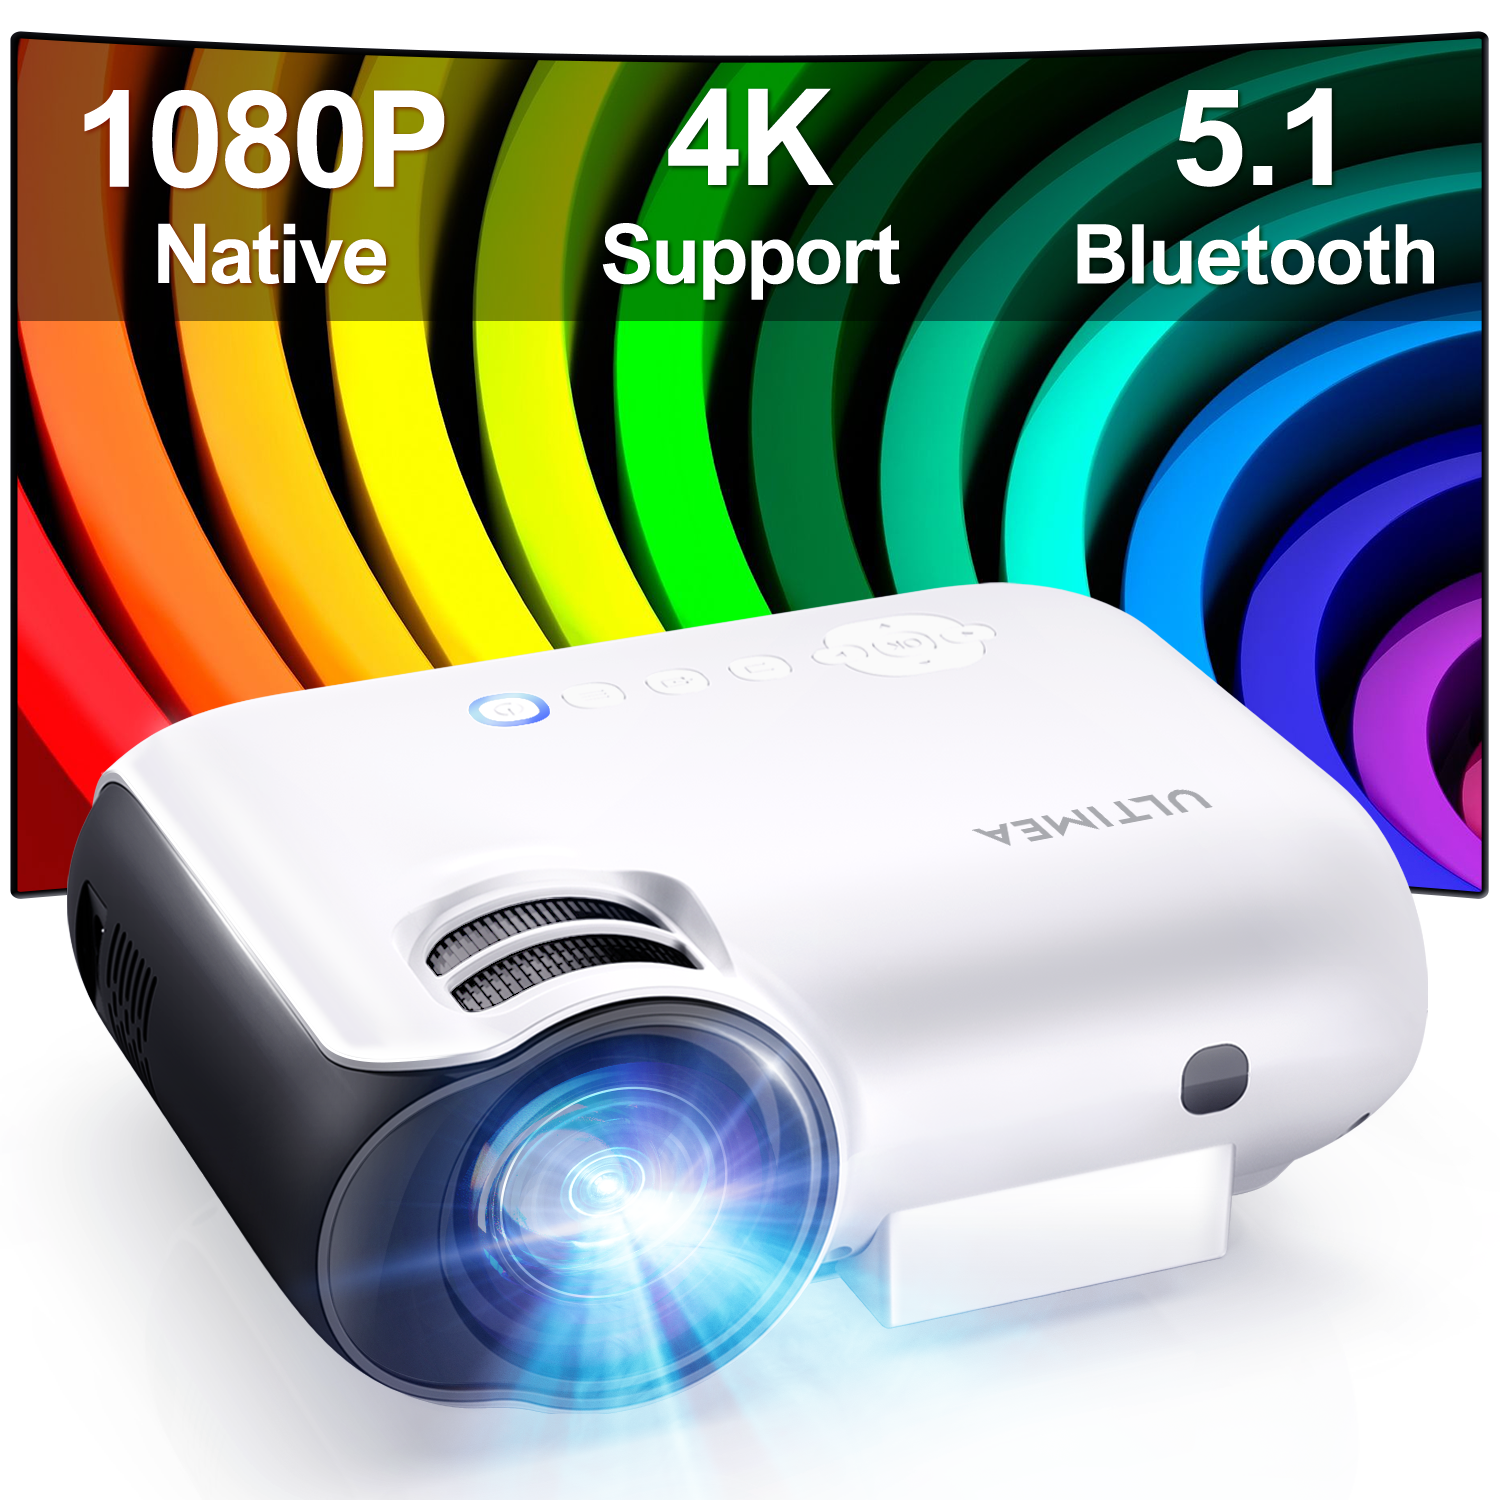 Native 1080P Full HD 4K Support Bluetooth 5.1 Projector, Ultimea Outdoor Movie Projector for Patio 10,000 Lux Home Theater Projector, for TV Stick, PS5, HDMI*2, USB*2